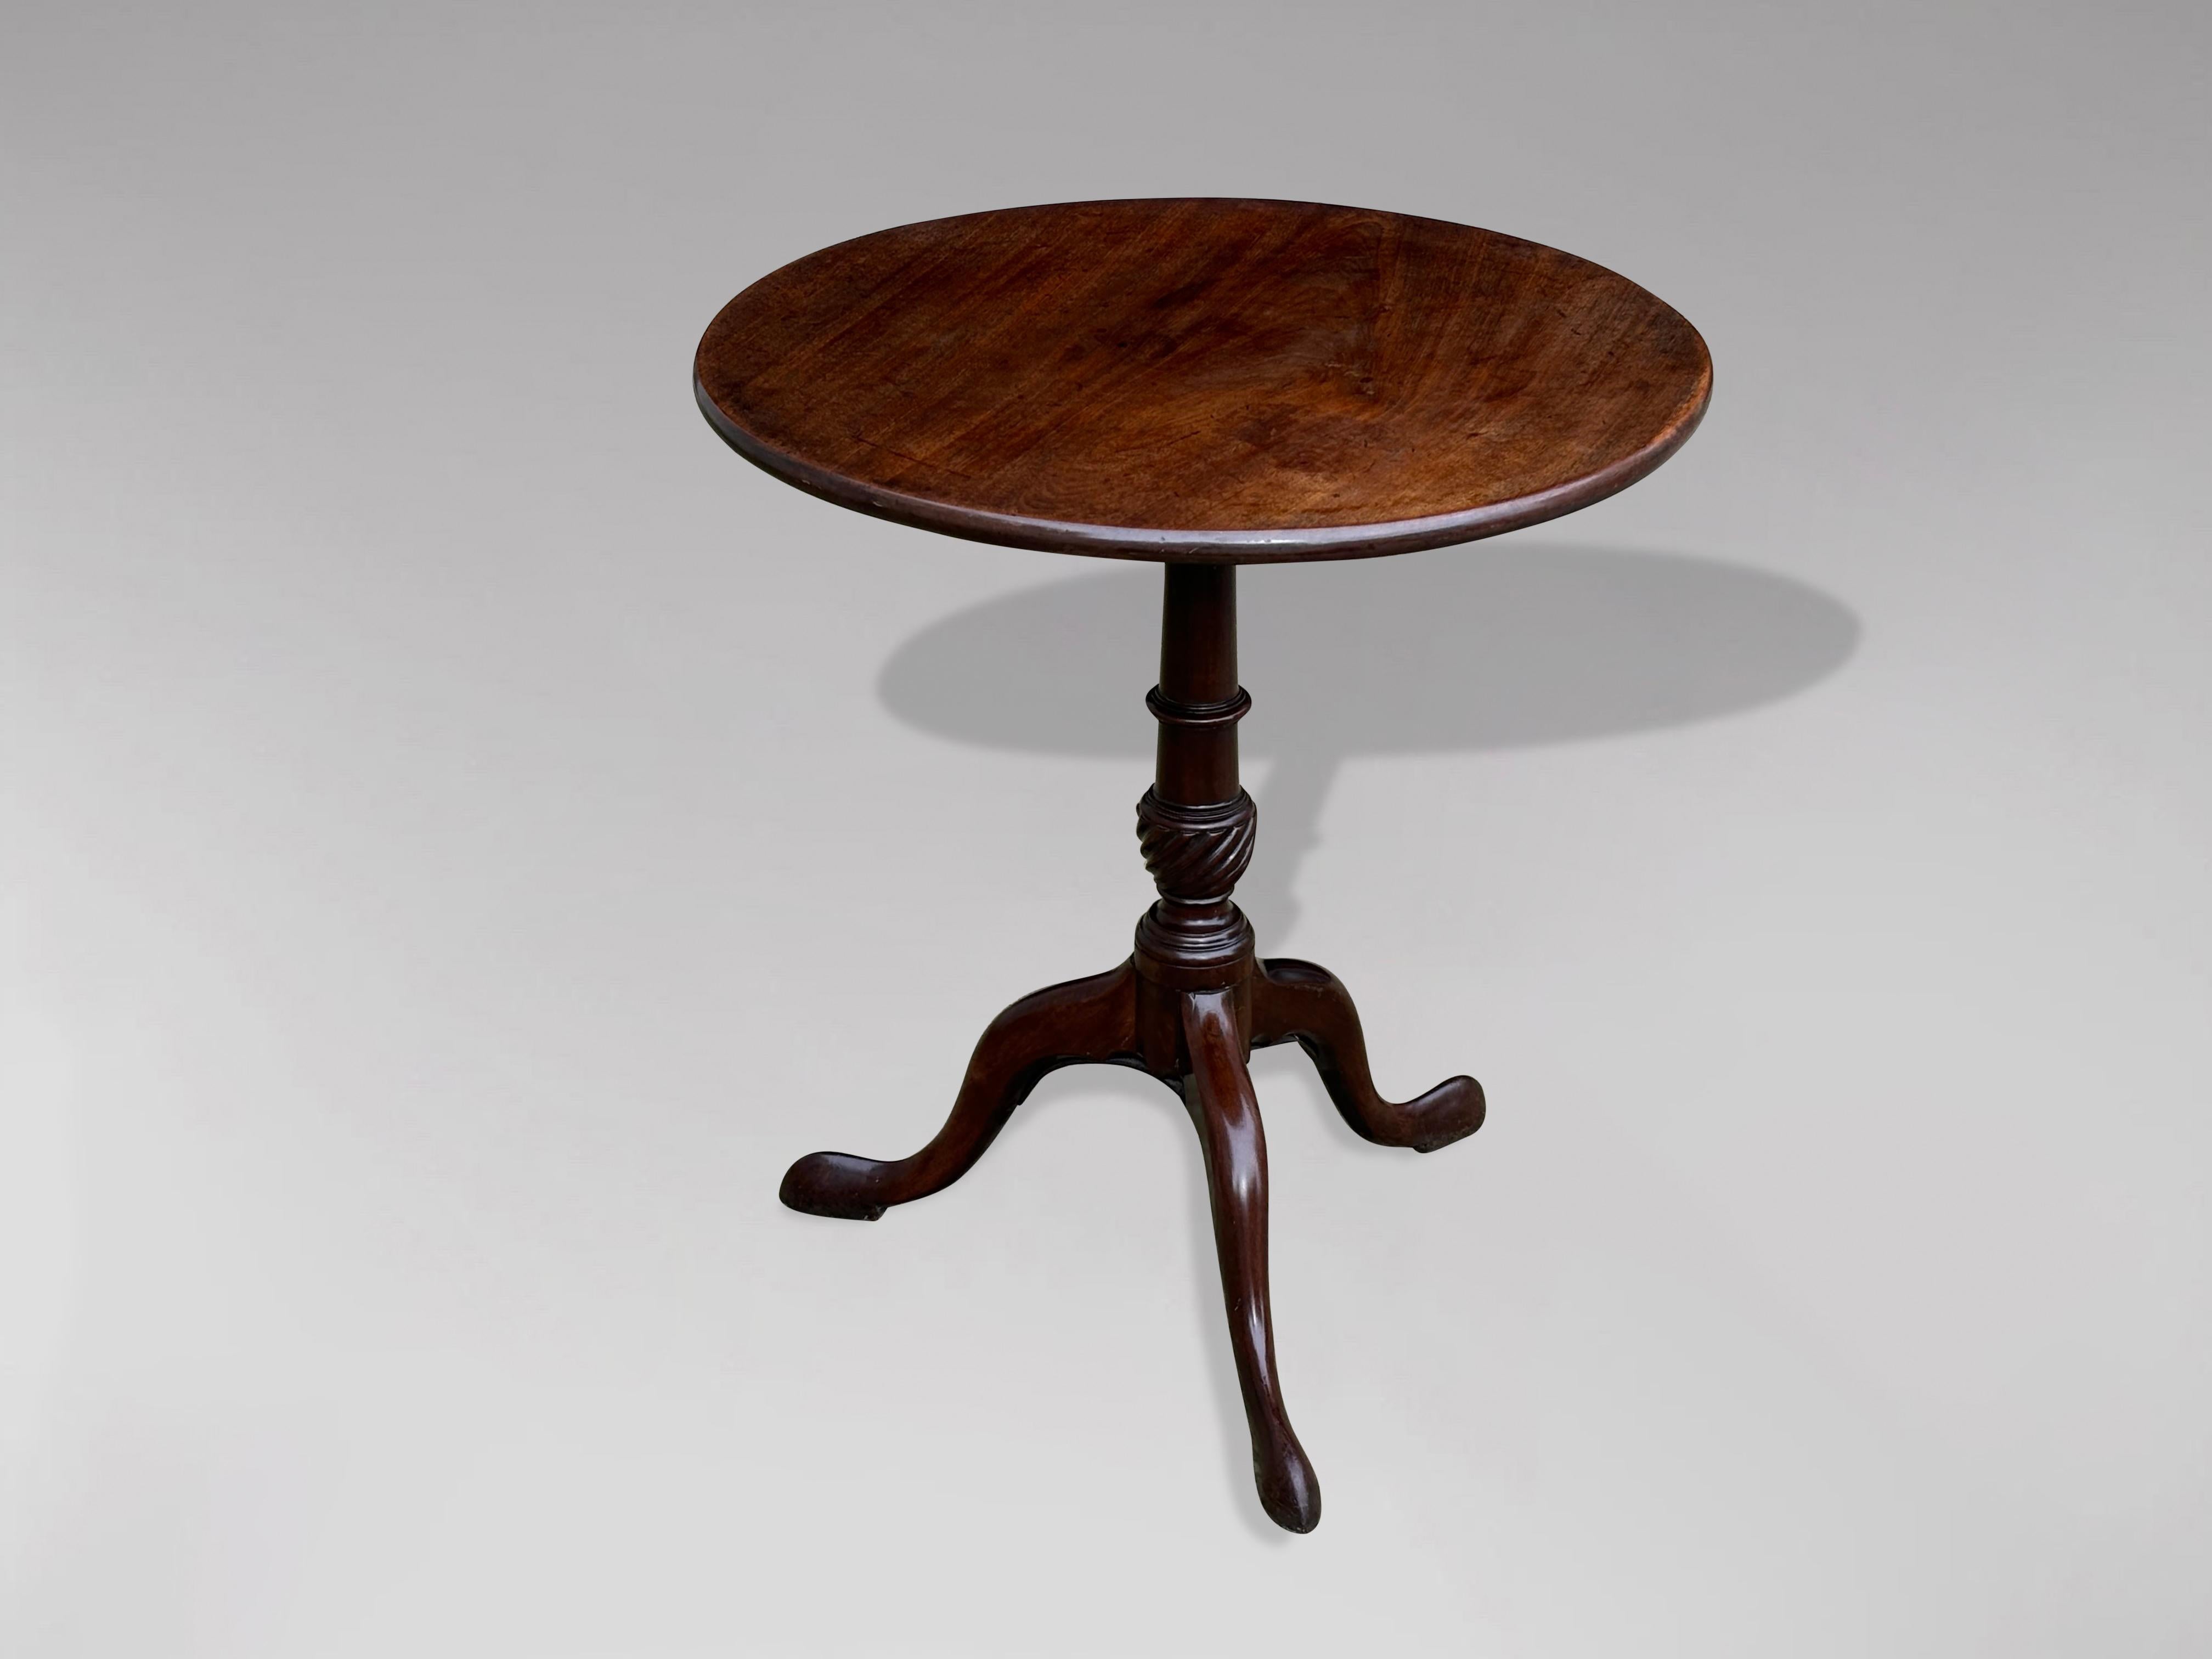 A handsome late 18th century, George III period mahogany tripod table. The well figured single piece of solid mahogany tilt-top circular top, above a turned baluster form column with vase shaped stem and raised on well drawn cabriole legs which